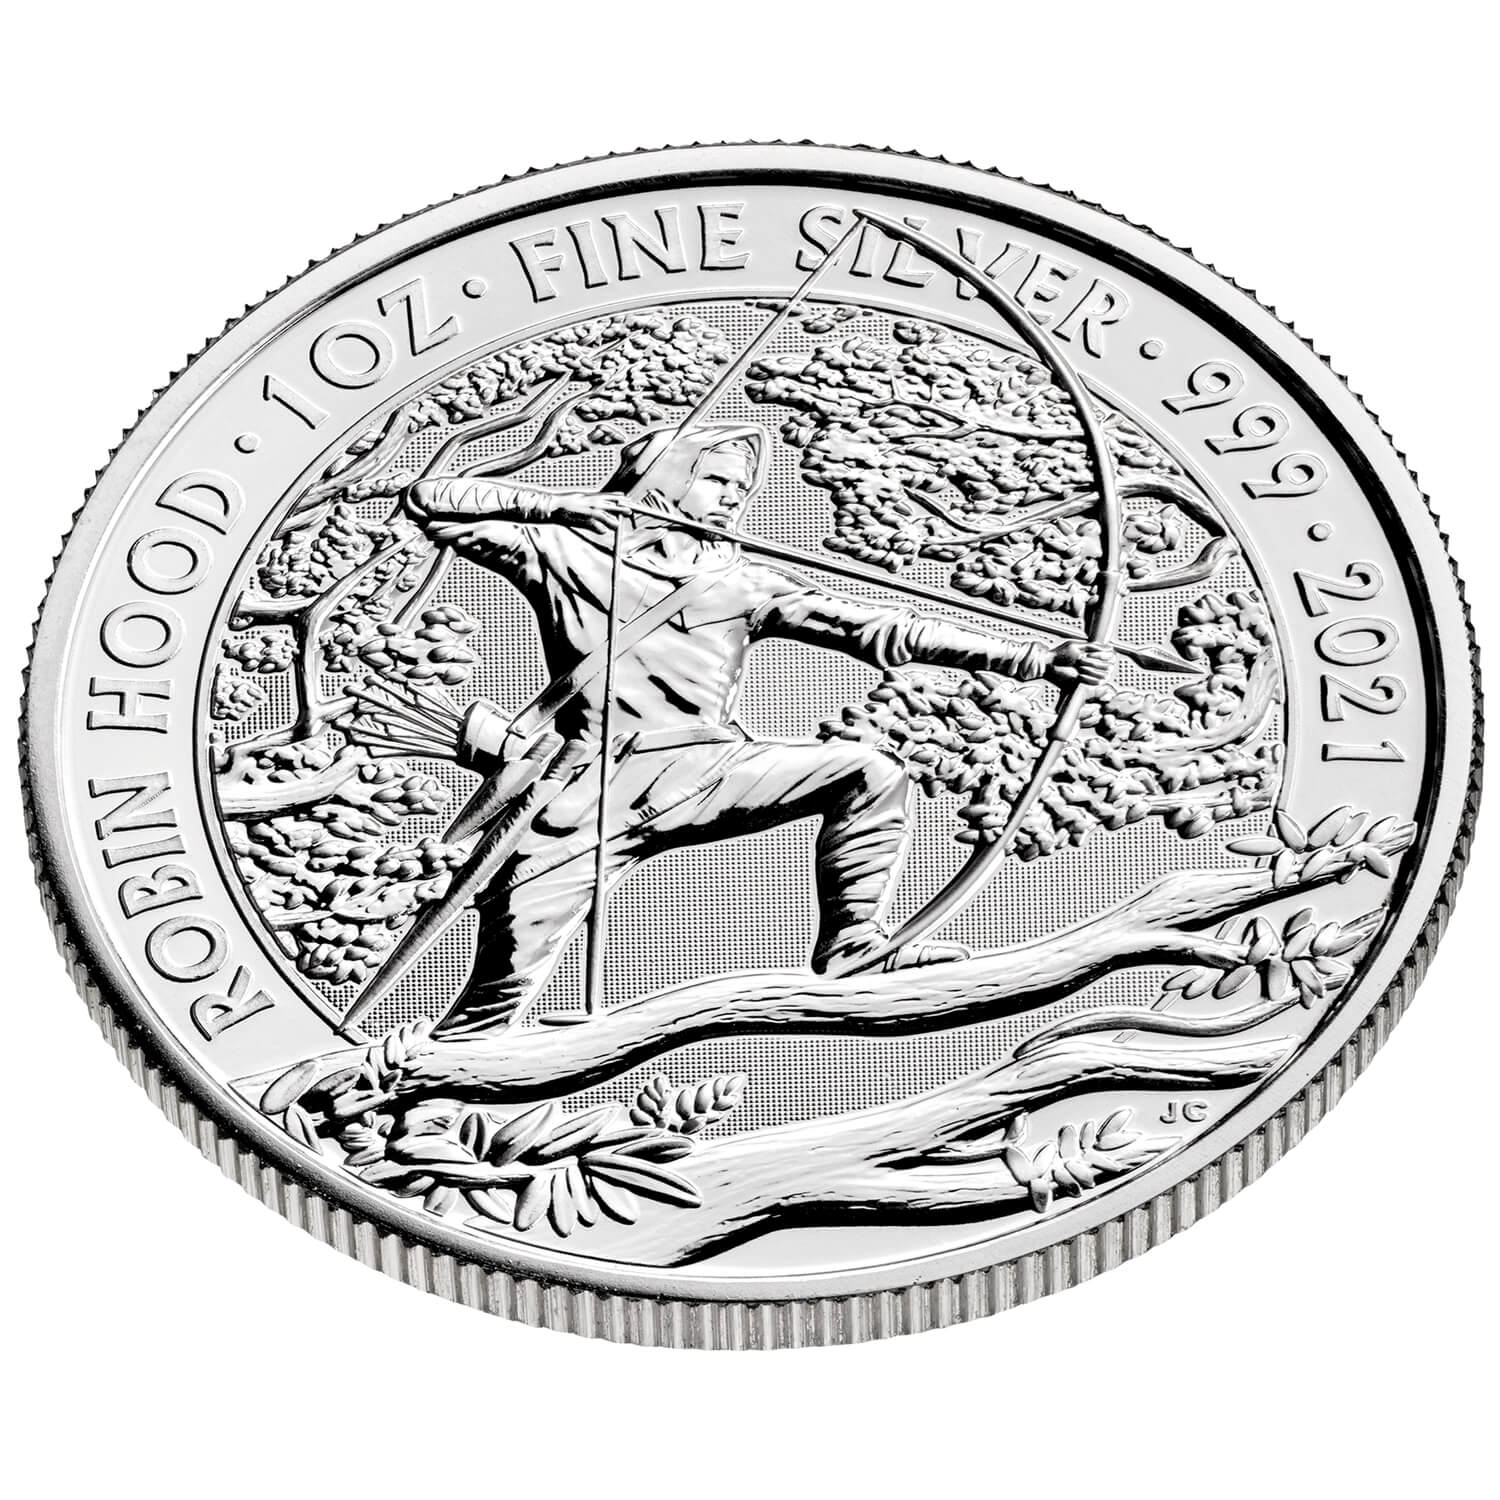 Silvern Metals 2021 Myths and Legends Robin Hood Silver Coin 1oz .999 silver in Lighthouse Capsule